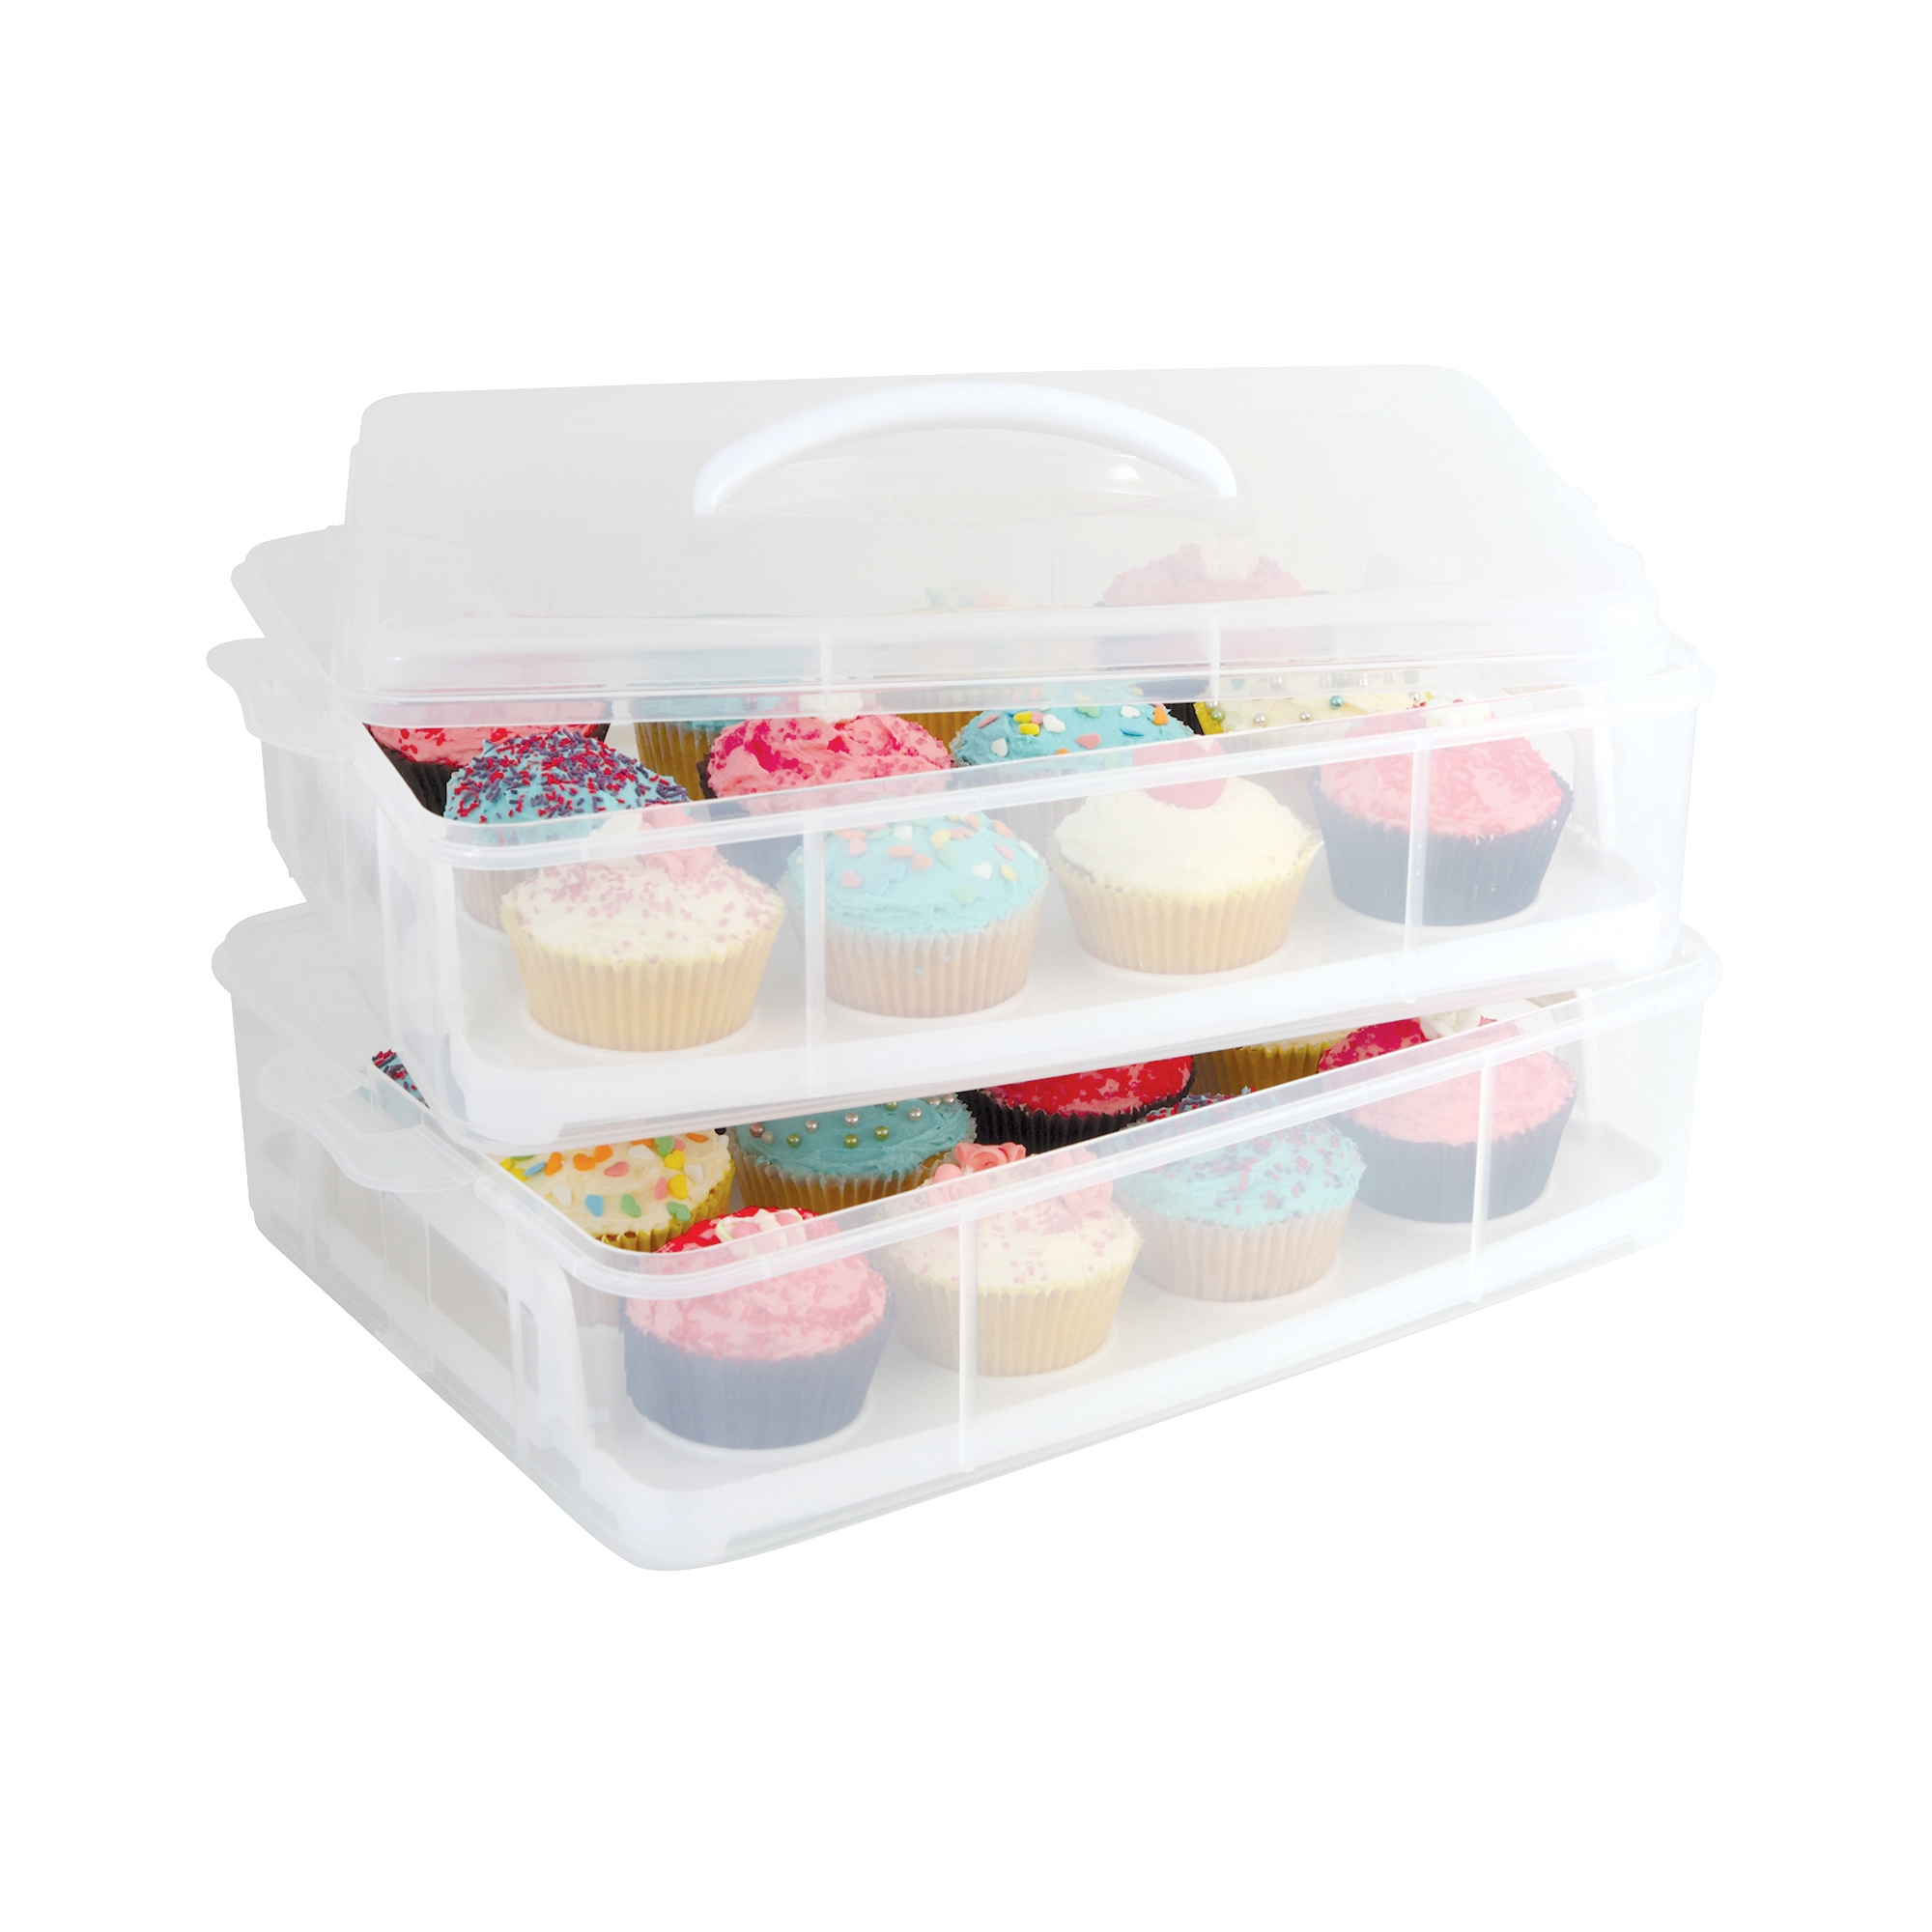 Daily Bake Stackable Cupcake Carrier Image 1